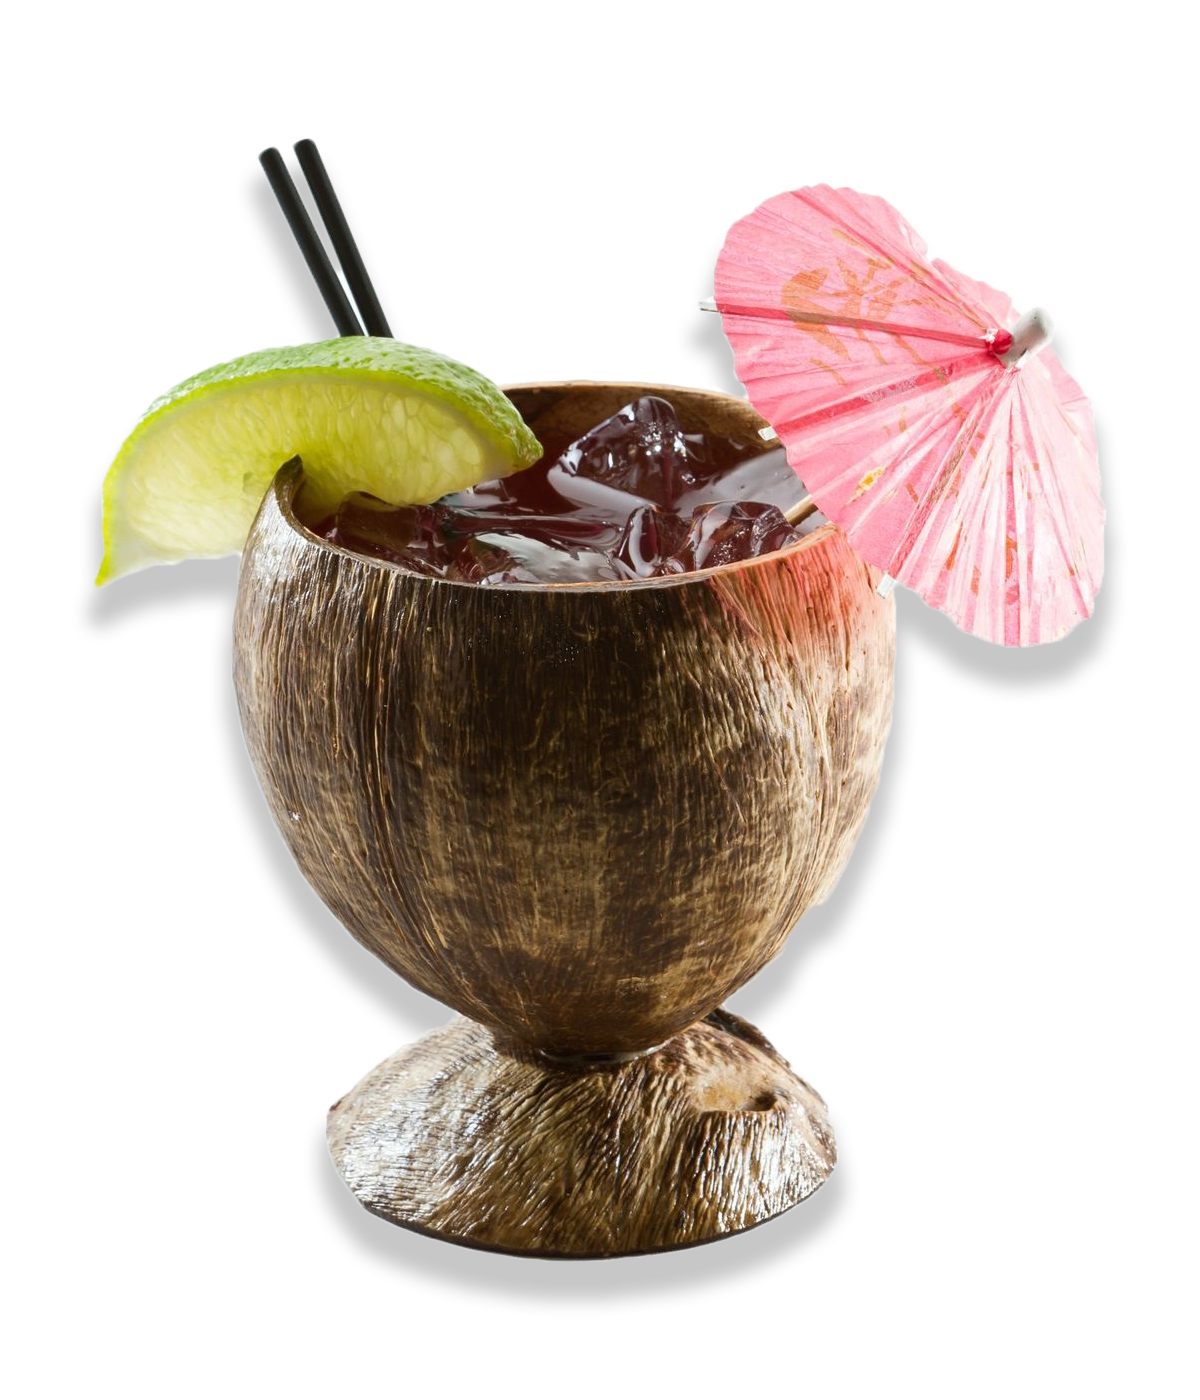 Refreshing summer drink served in a coconut shell garnished with a lime and a parasol.